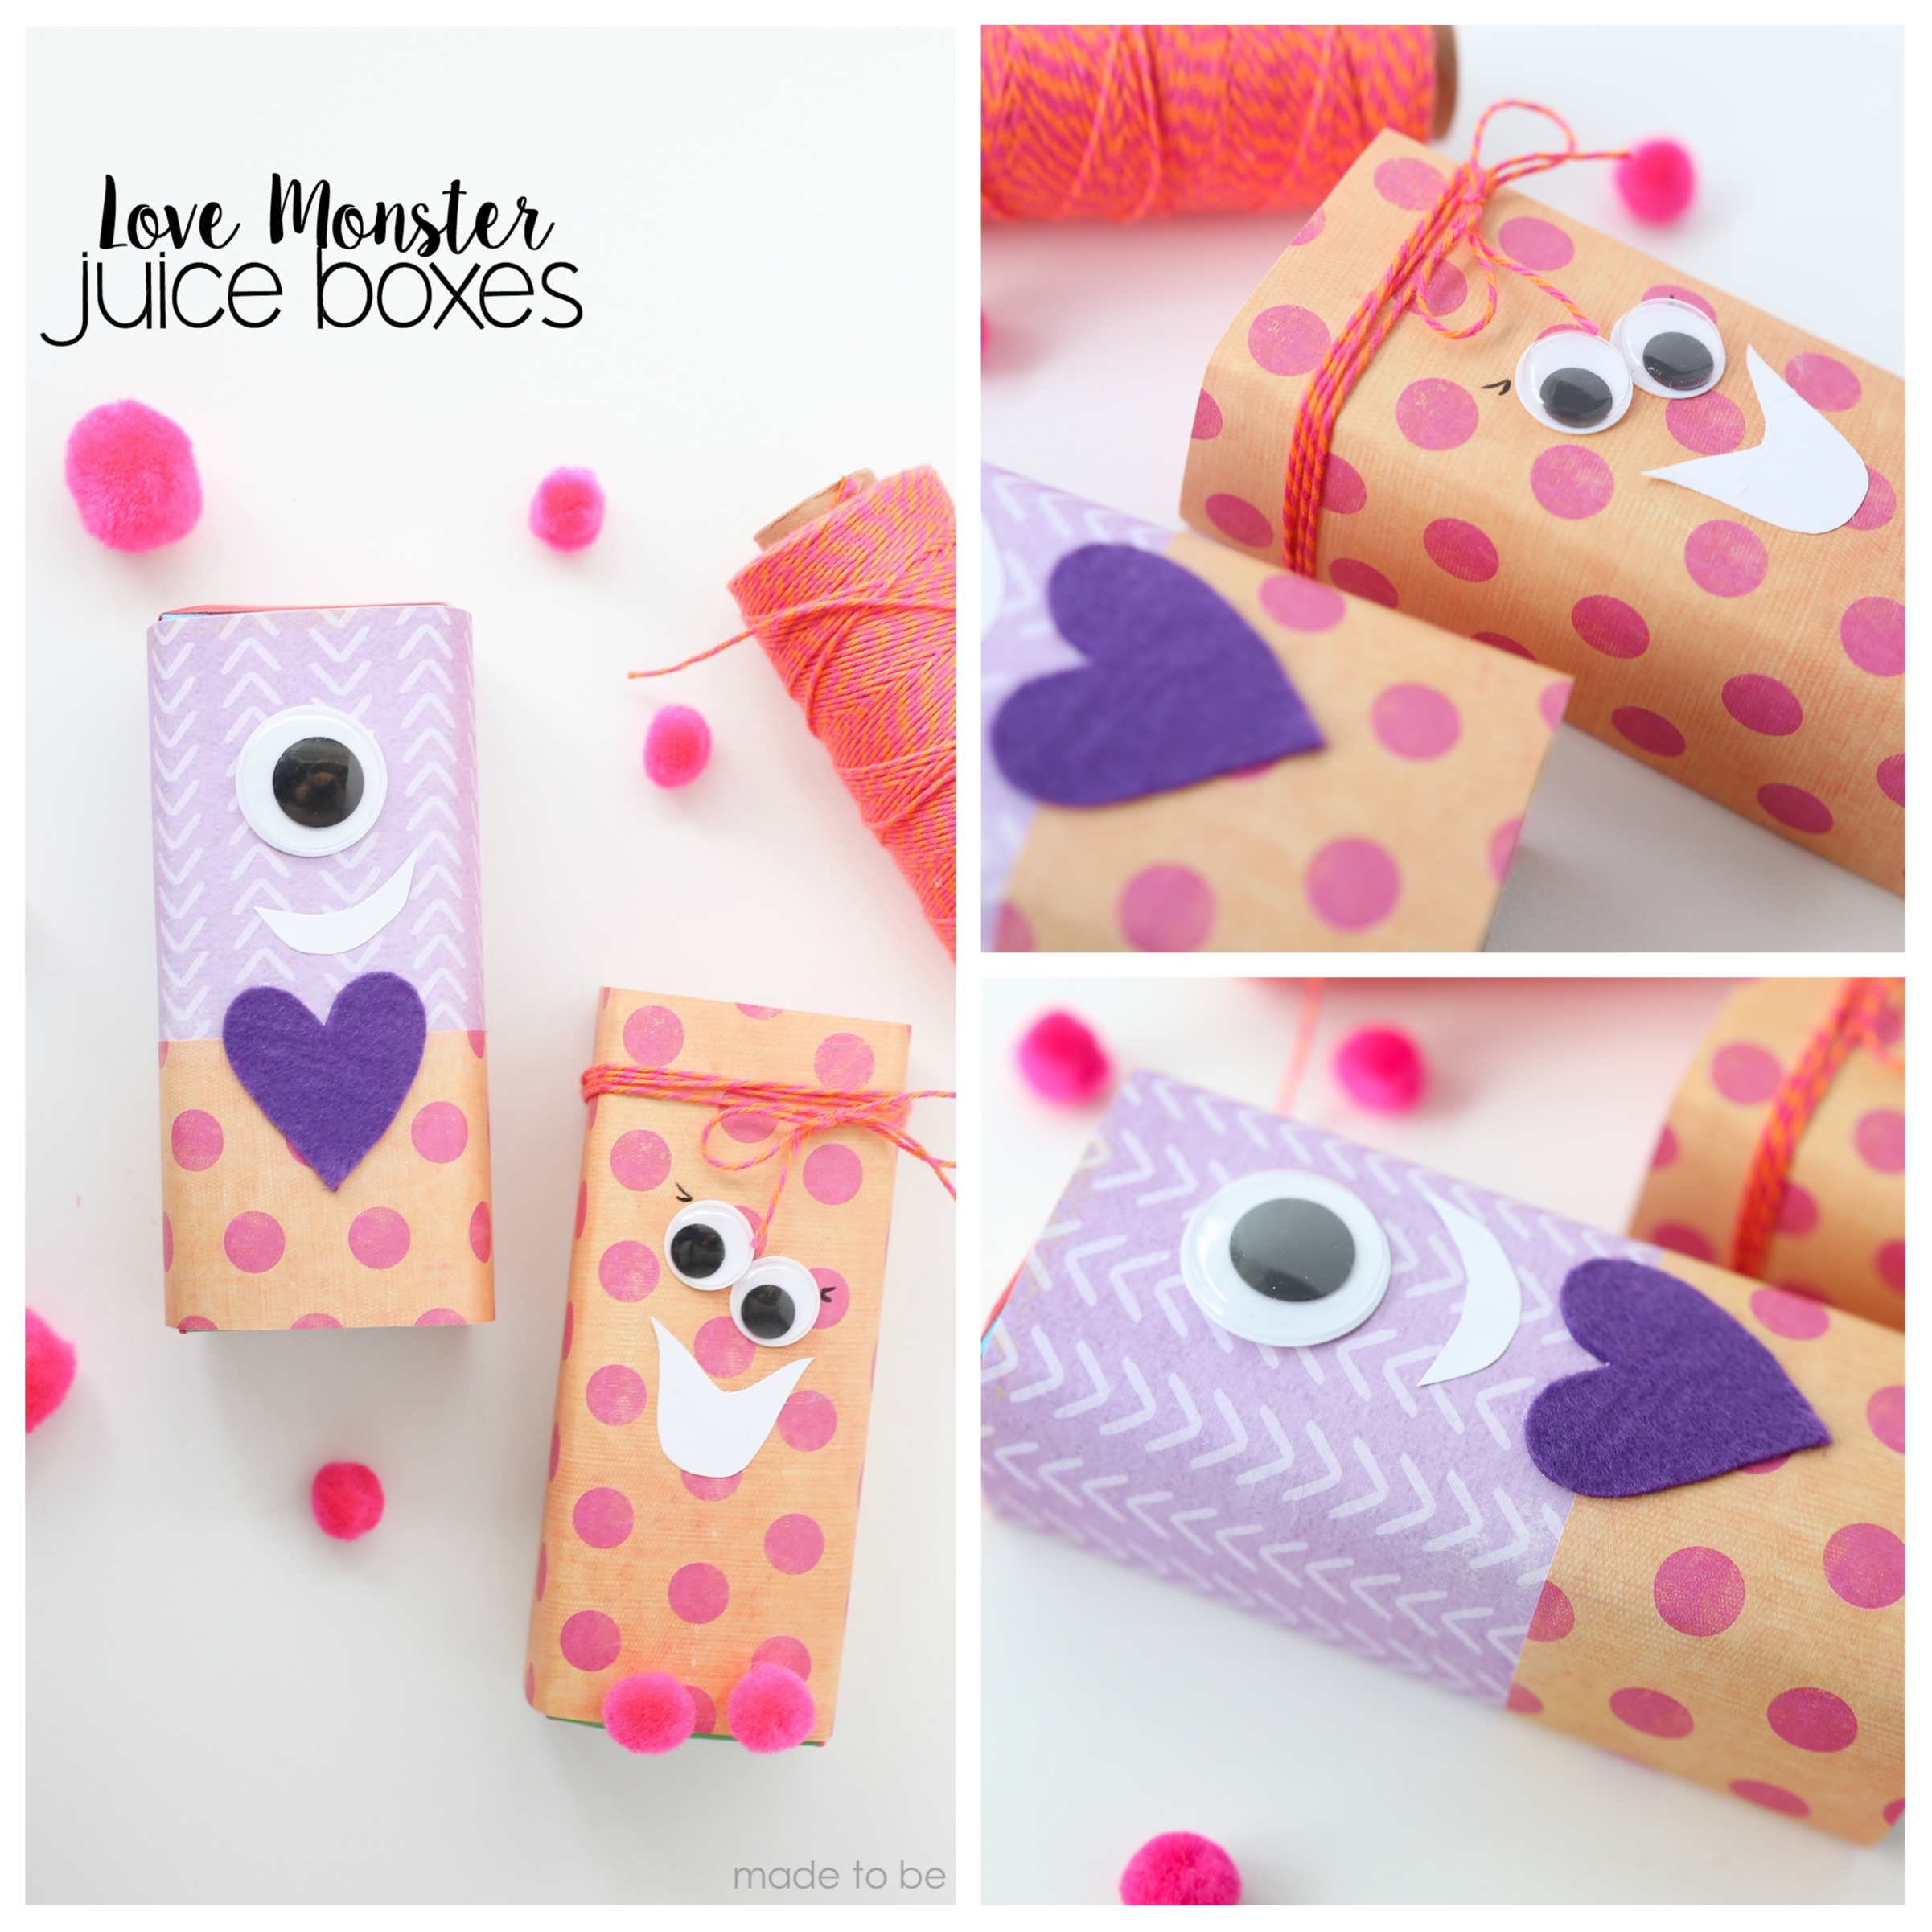 Love Monster Juice Boxes are a fun valentine activity for the kids to do at home or at school.